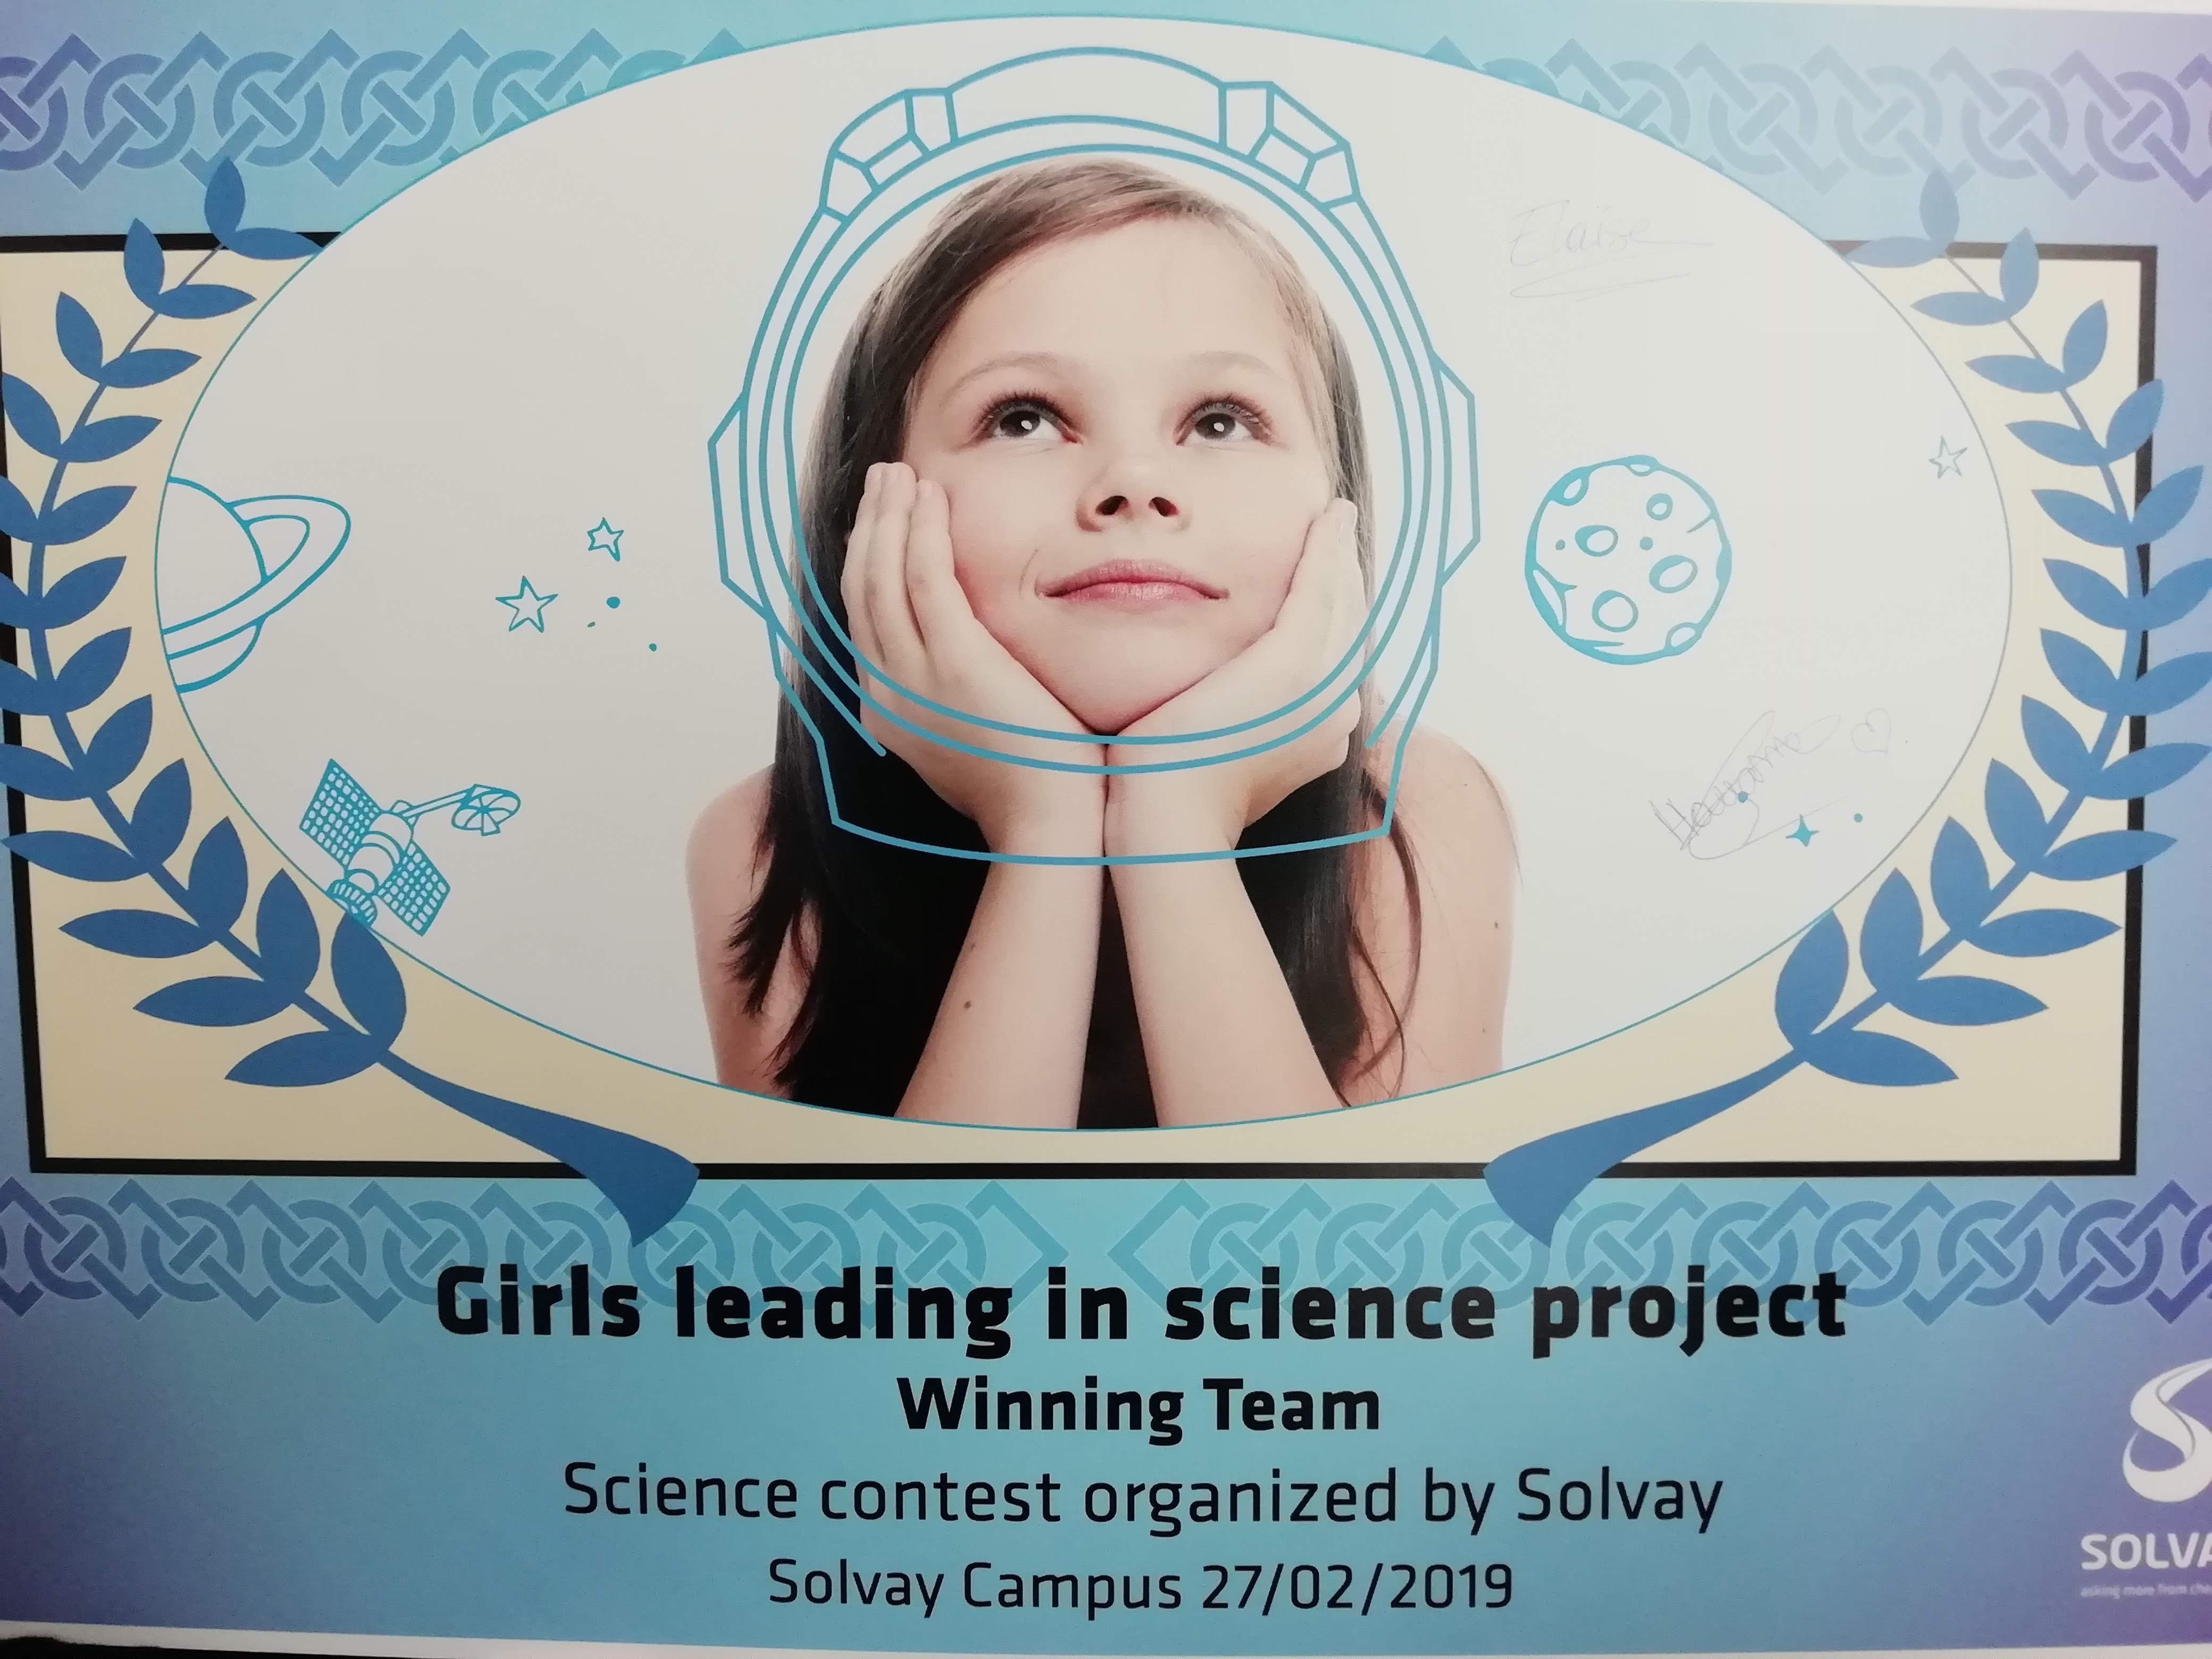 L’IPES d’Ath lauréat du concours « Girls Leading in Science Project »